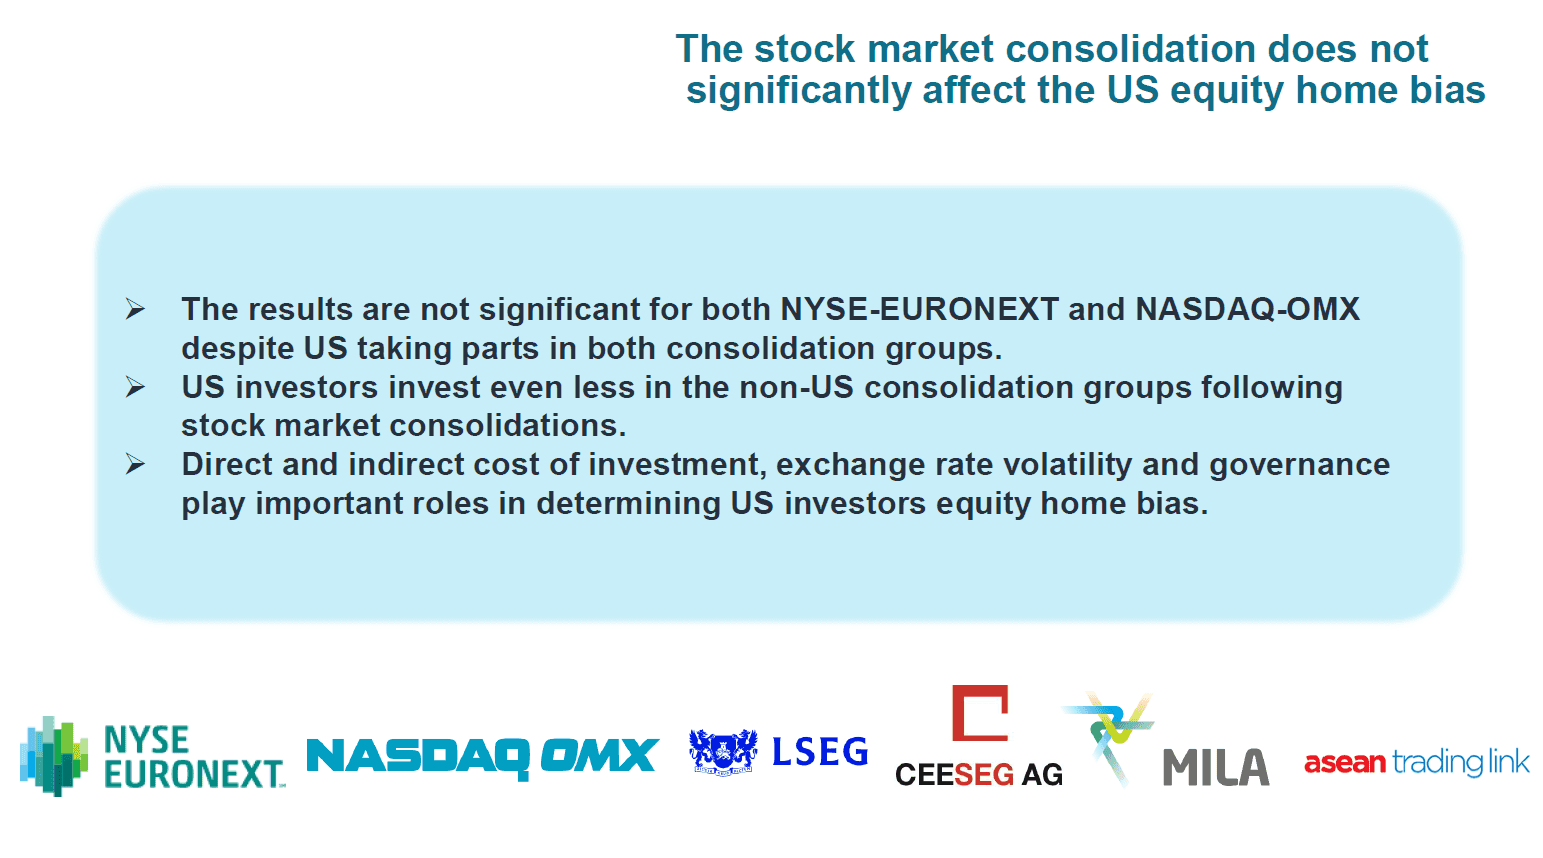 Stock market consolidation and US equity home bias